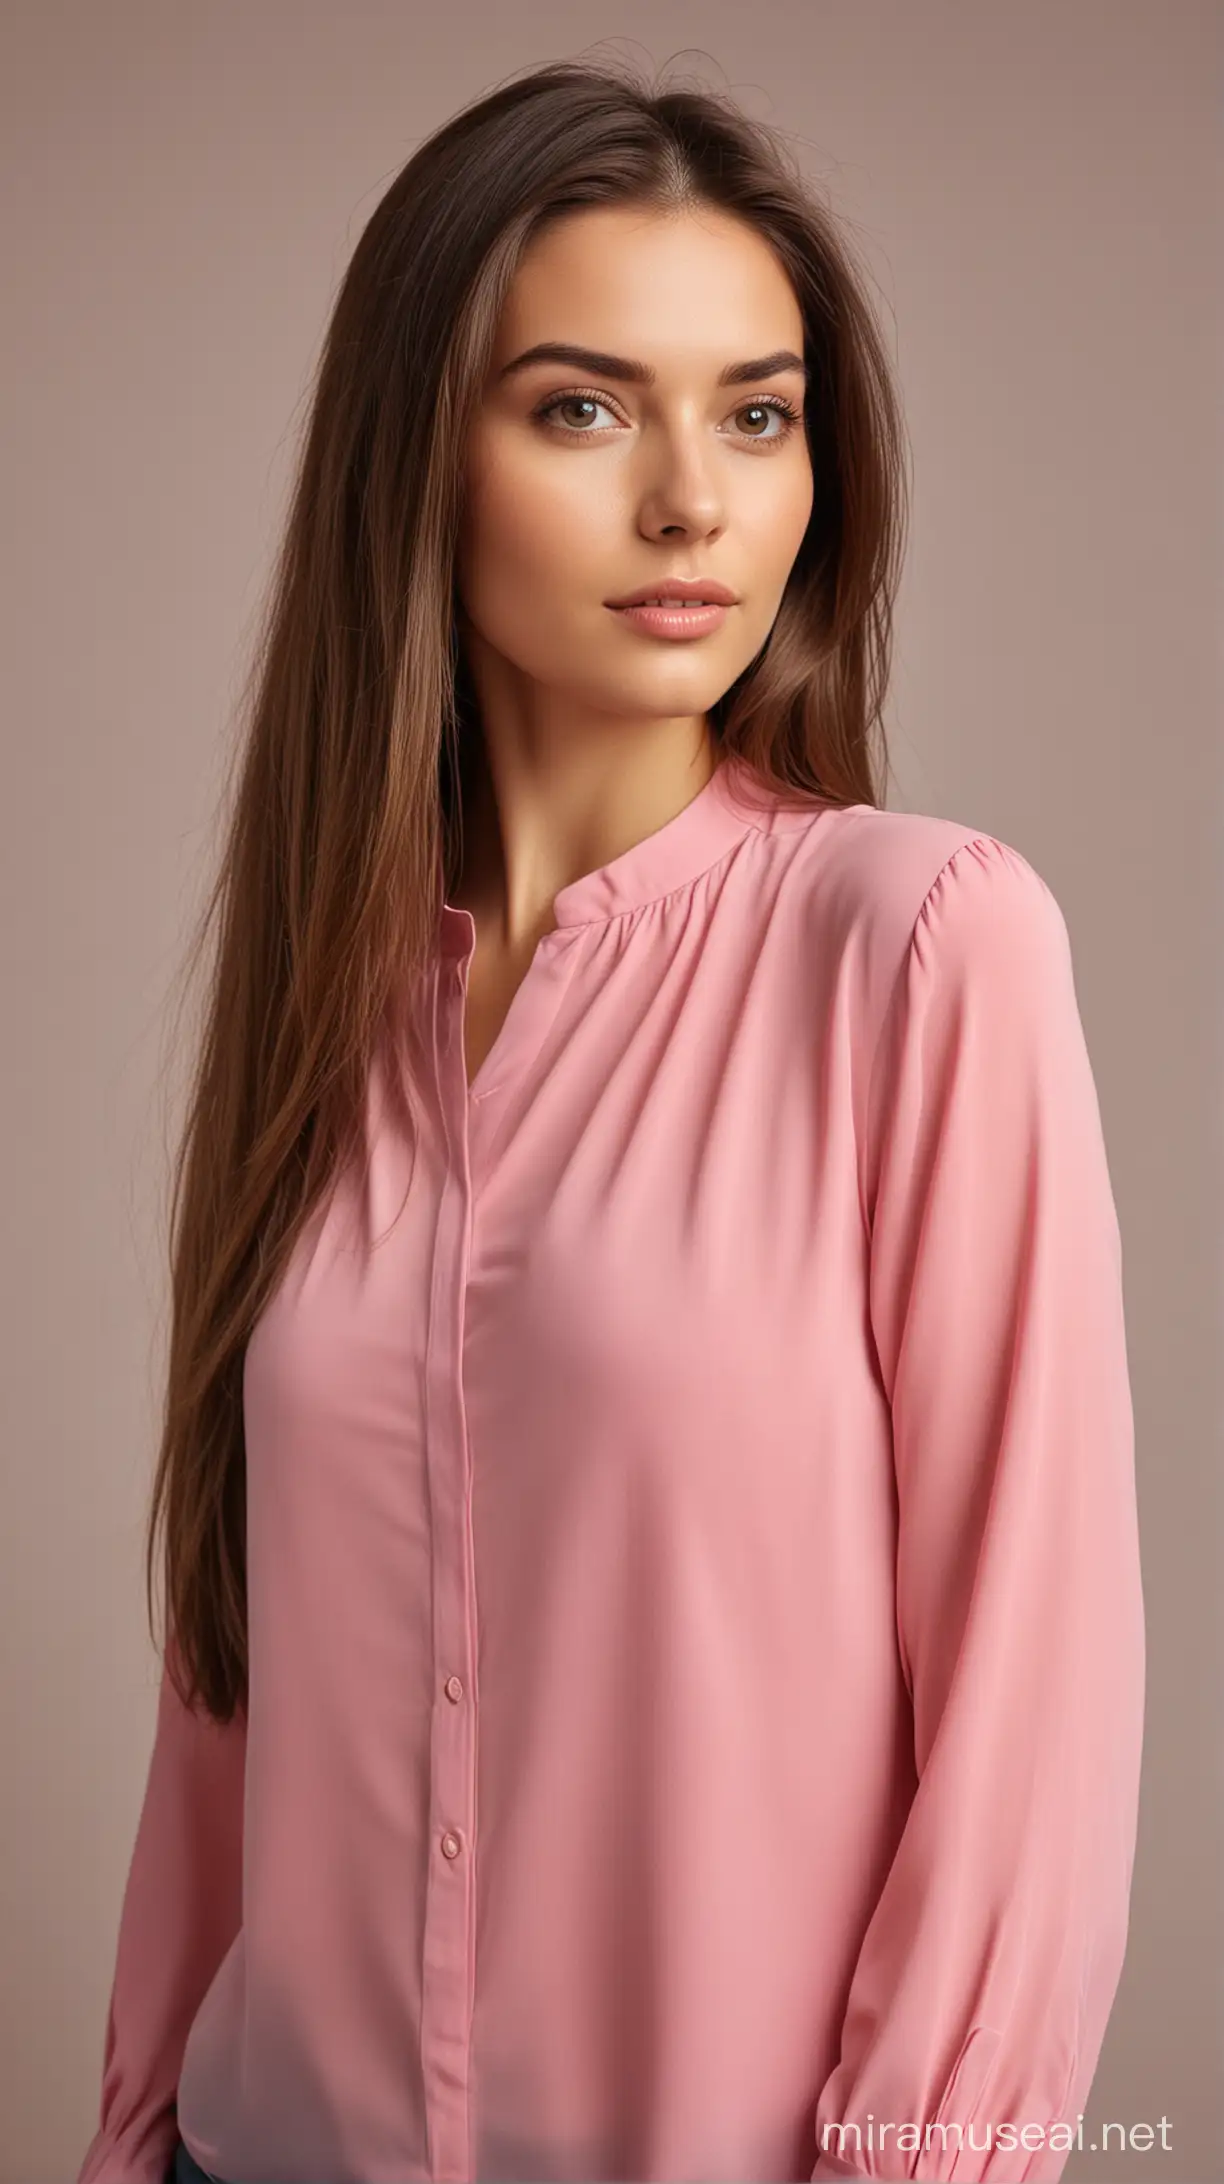 A woman with long, brown, very straight and soft hair, wearing a pink blouse 